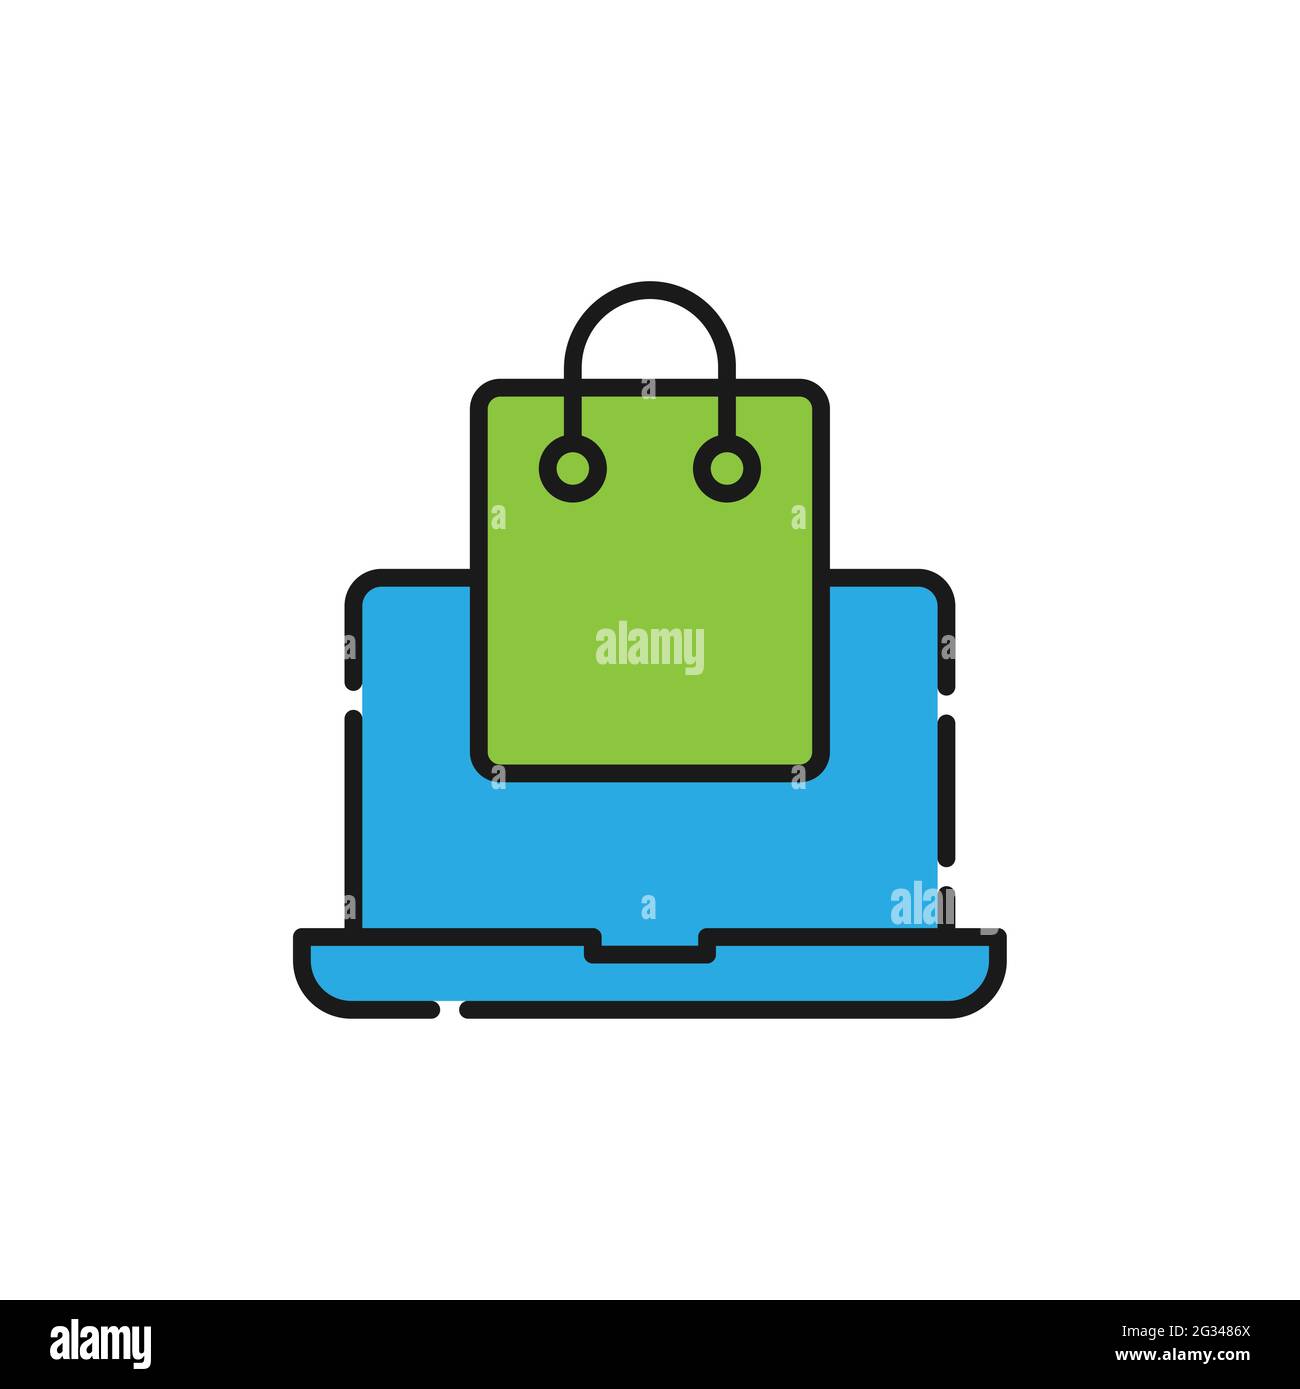 Shopping Bag with Laptop icon Vector Design. Shopping Bag icon with Laptop design concept for e-commerce, online store and marketplace website, mobile Stock Vector